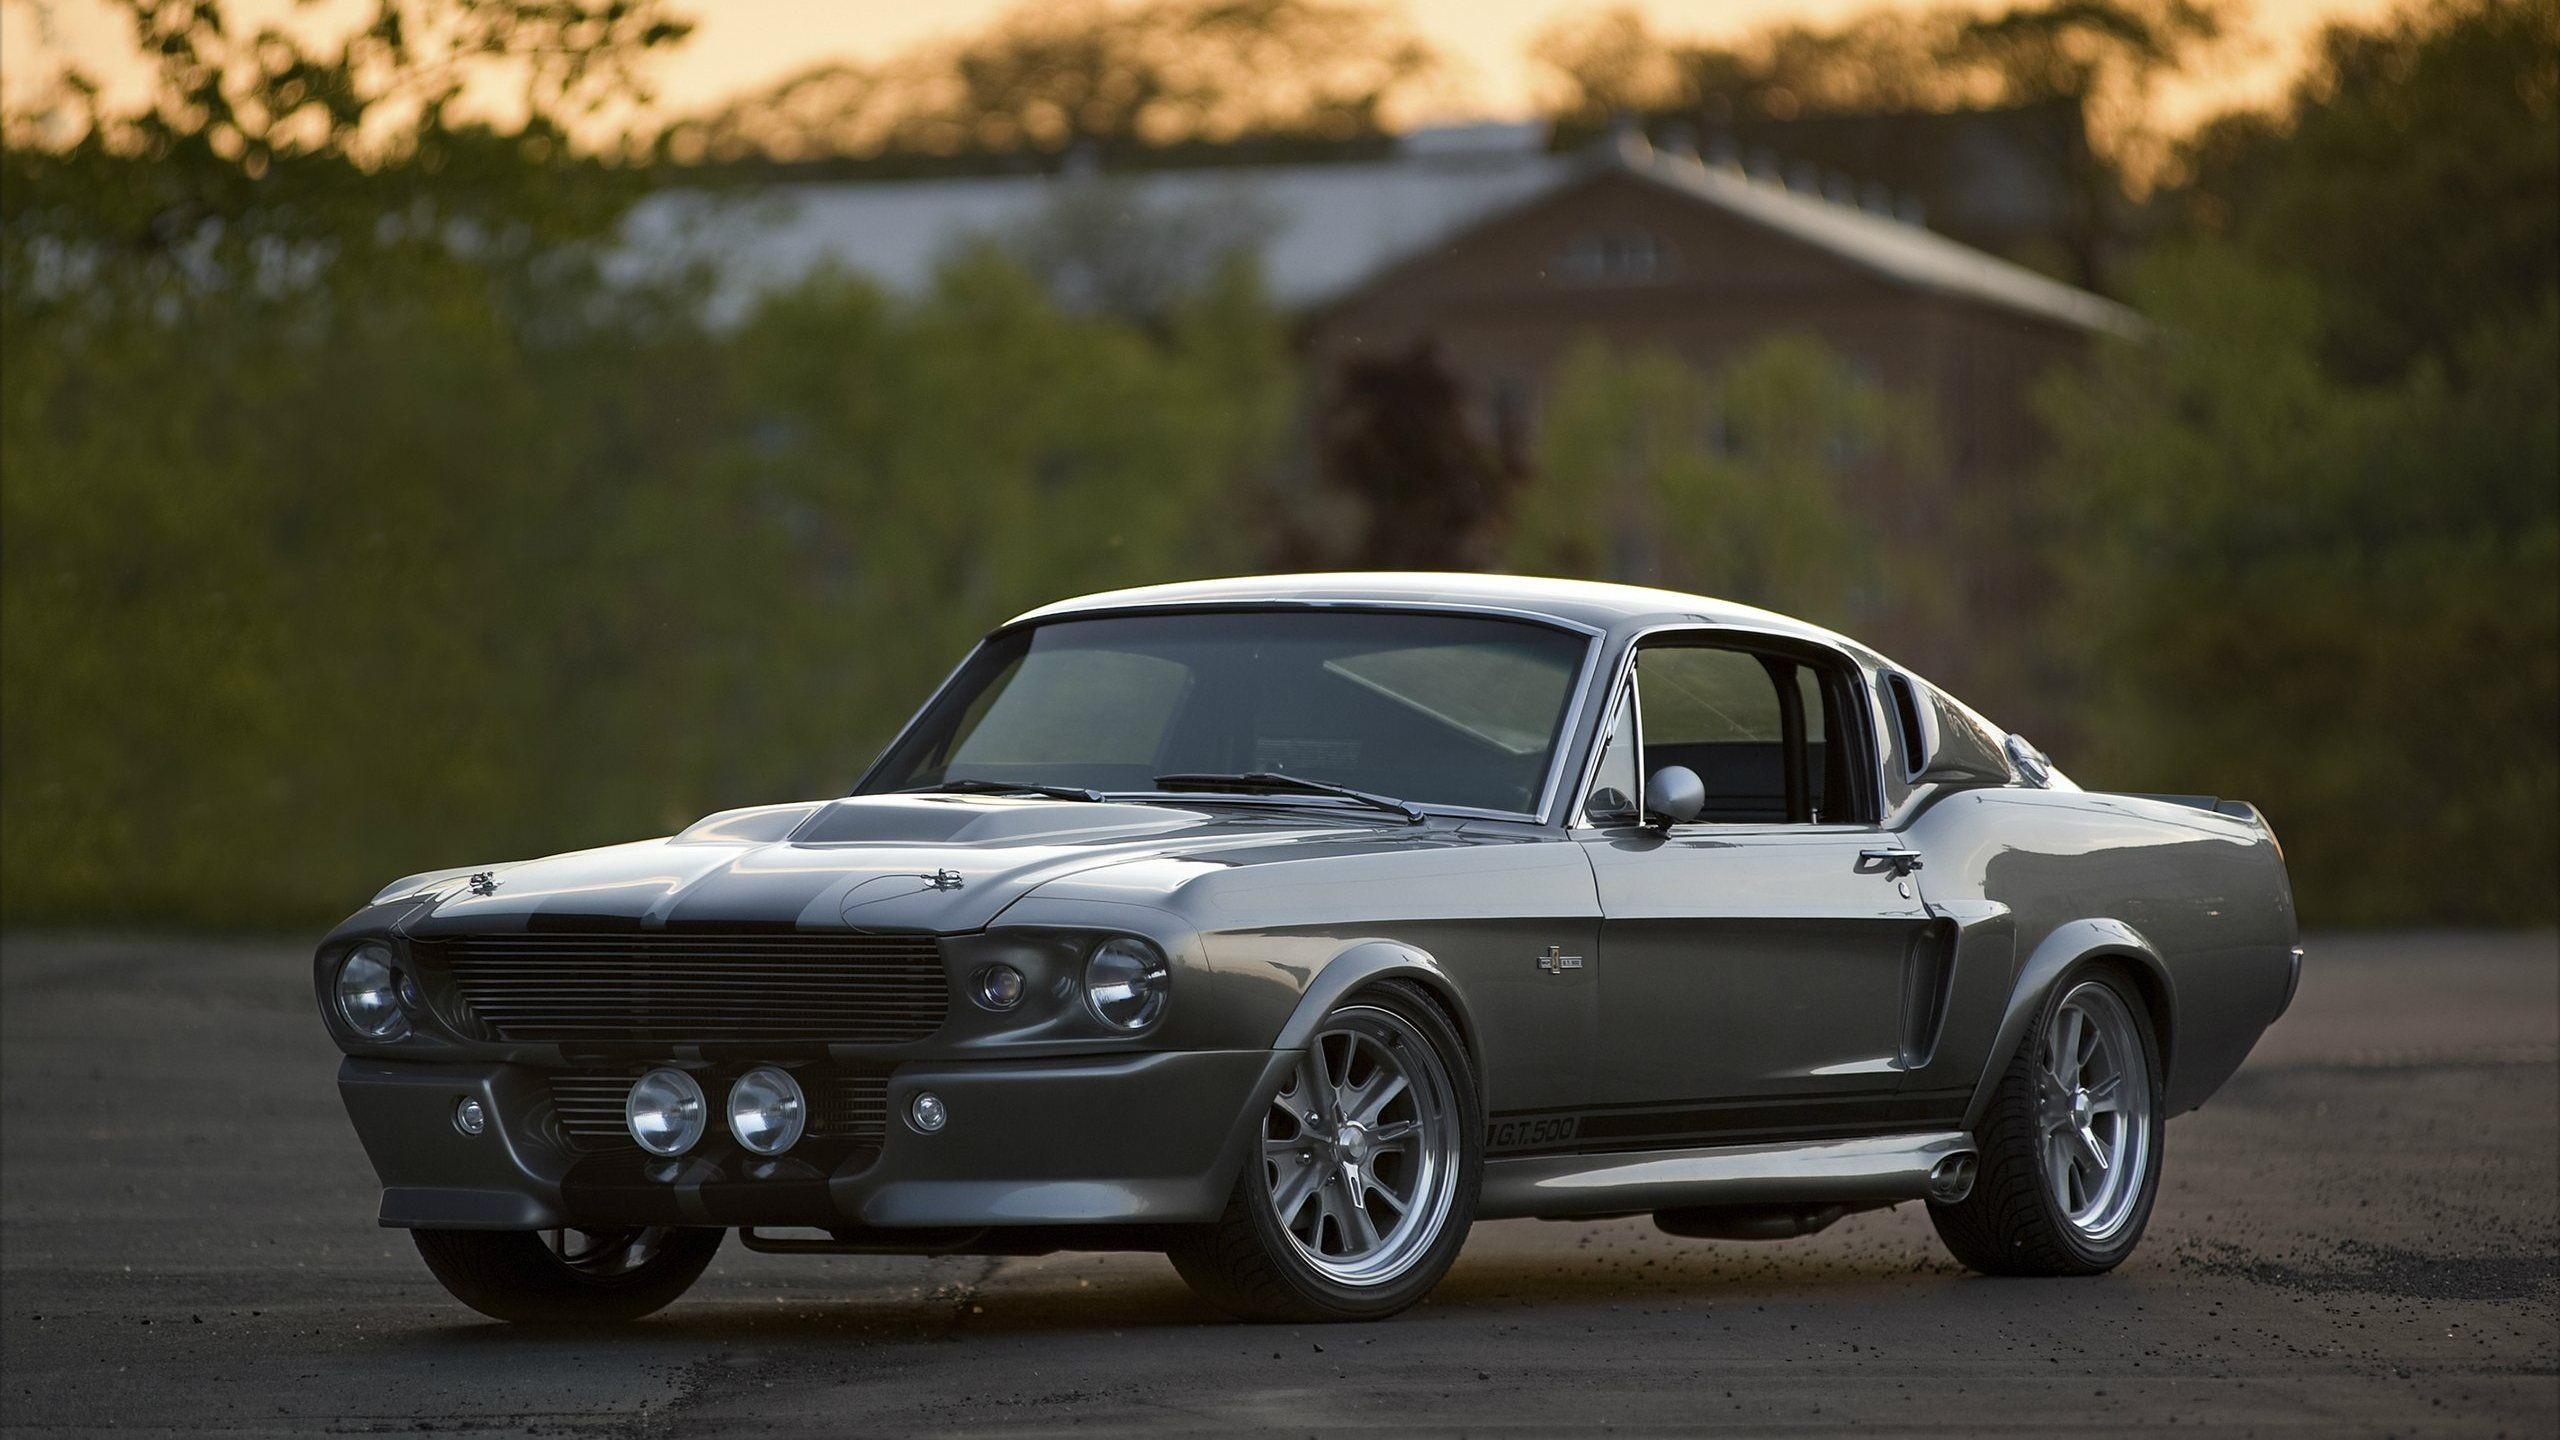 2560x1440 ... Shelby Mustang Wallpaper Phone #4Wm | Cars | Pinterest | Shelby ... 1967  ...